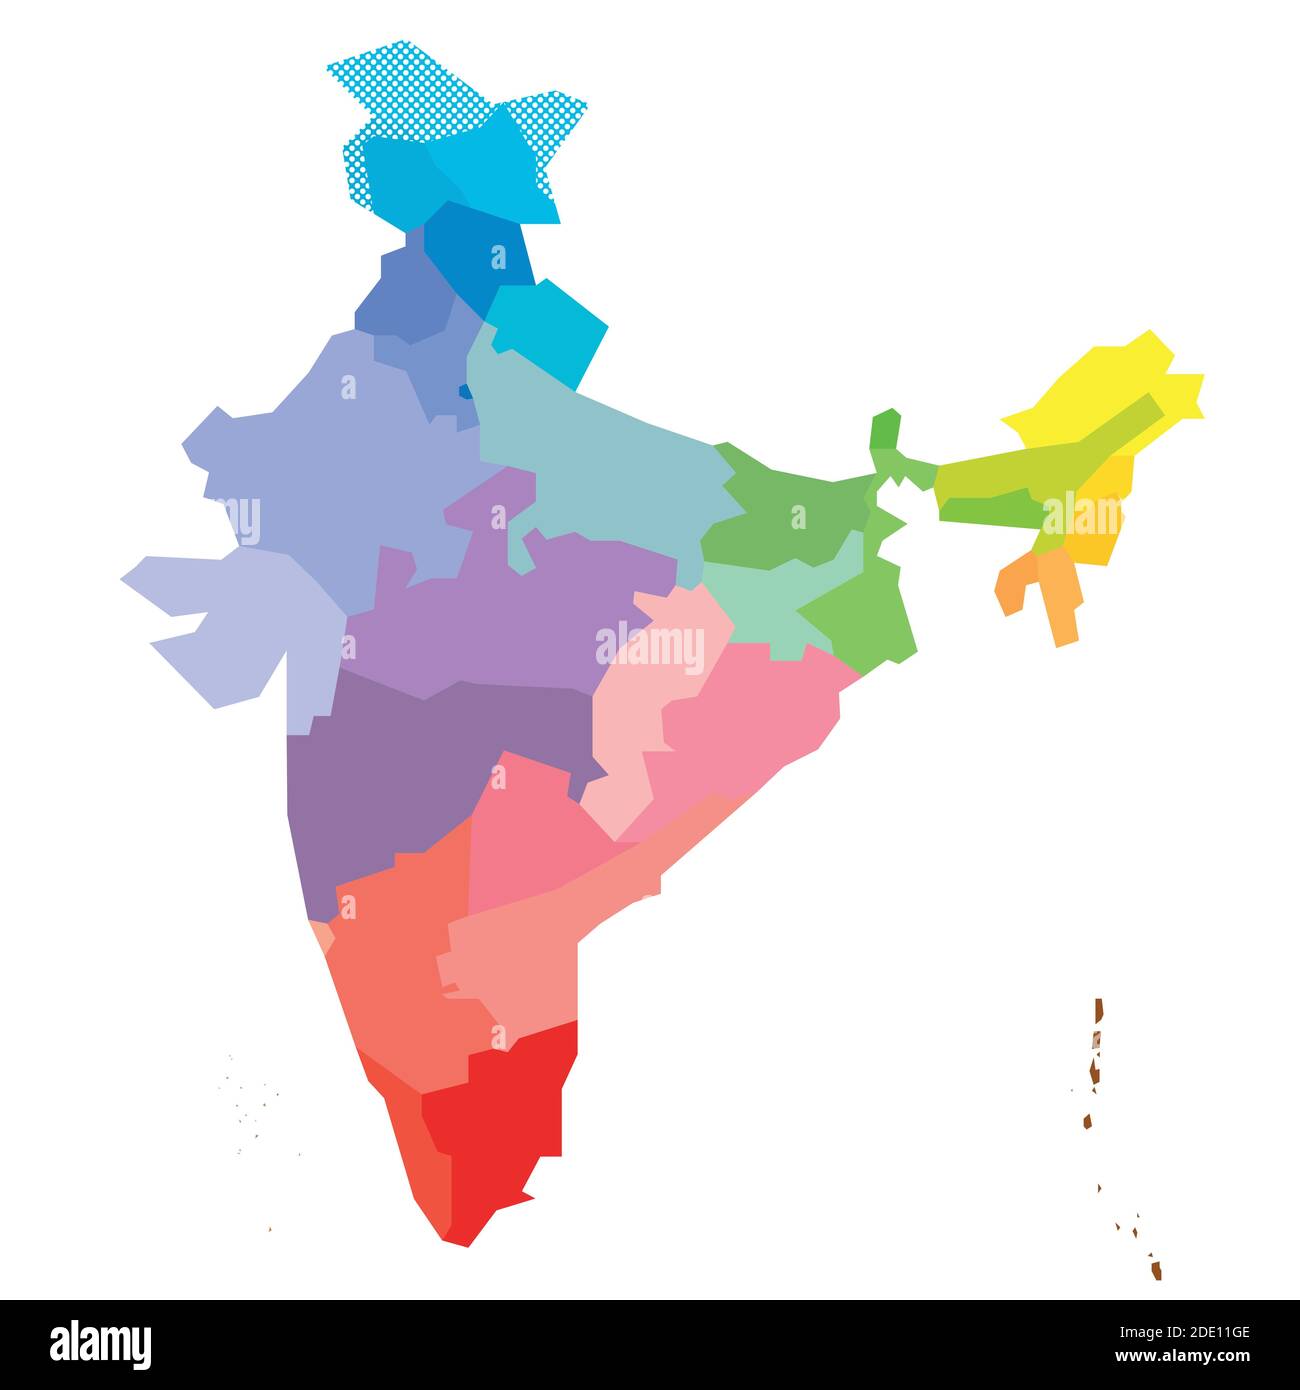 Blank colorful political map of India. Administrative divisions - states and union territories. Simple flat vector map. Stock Vector